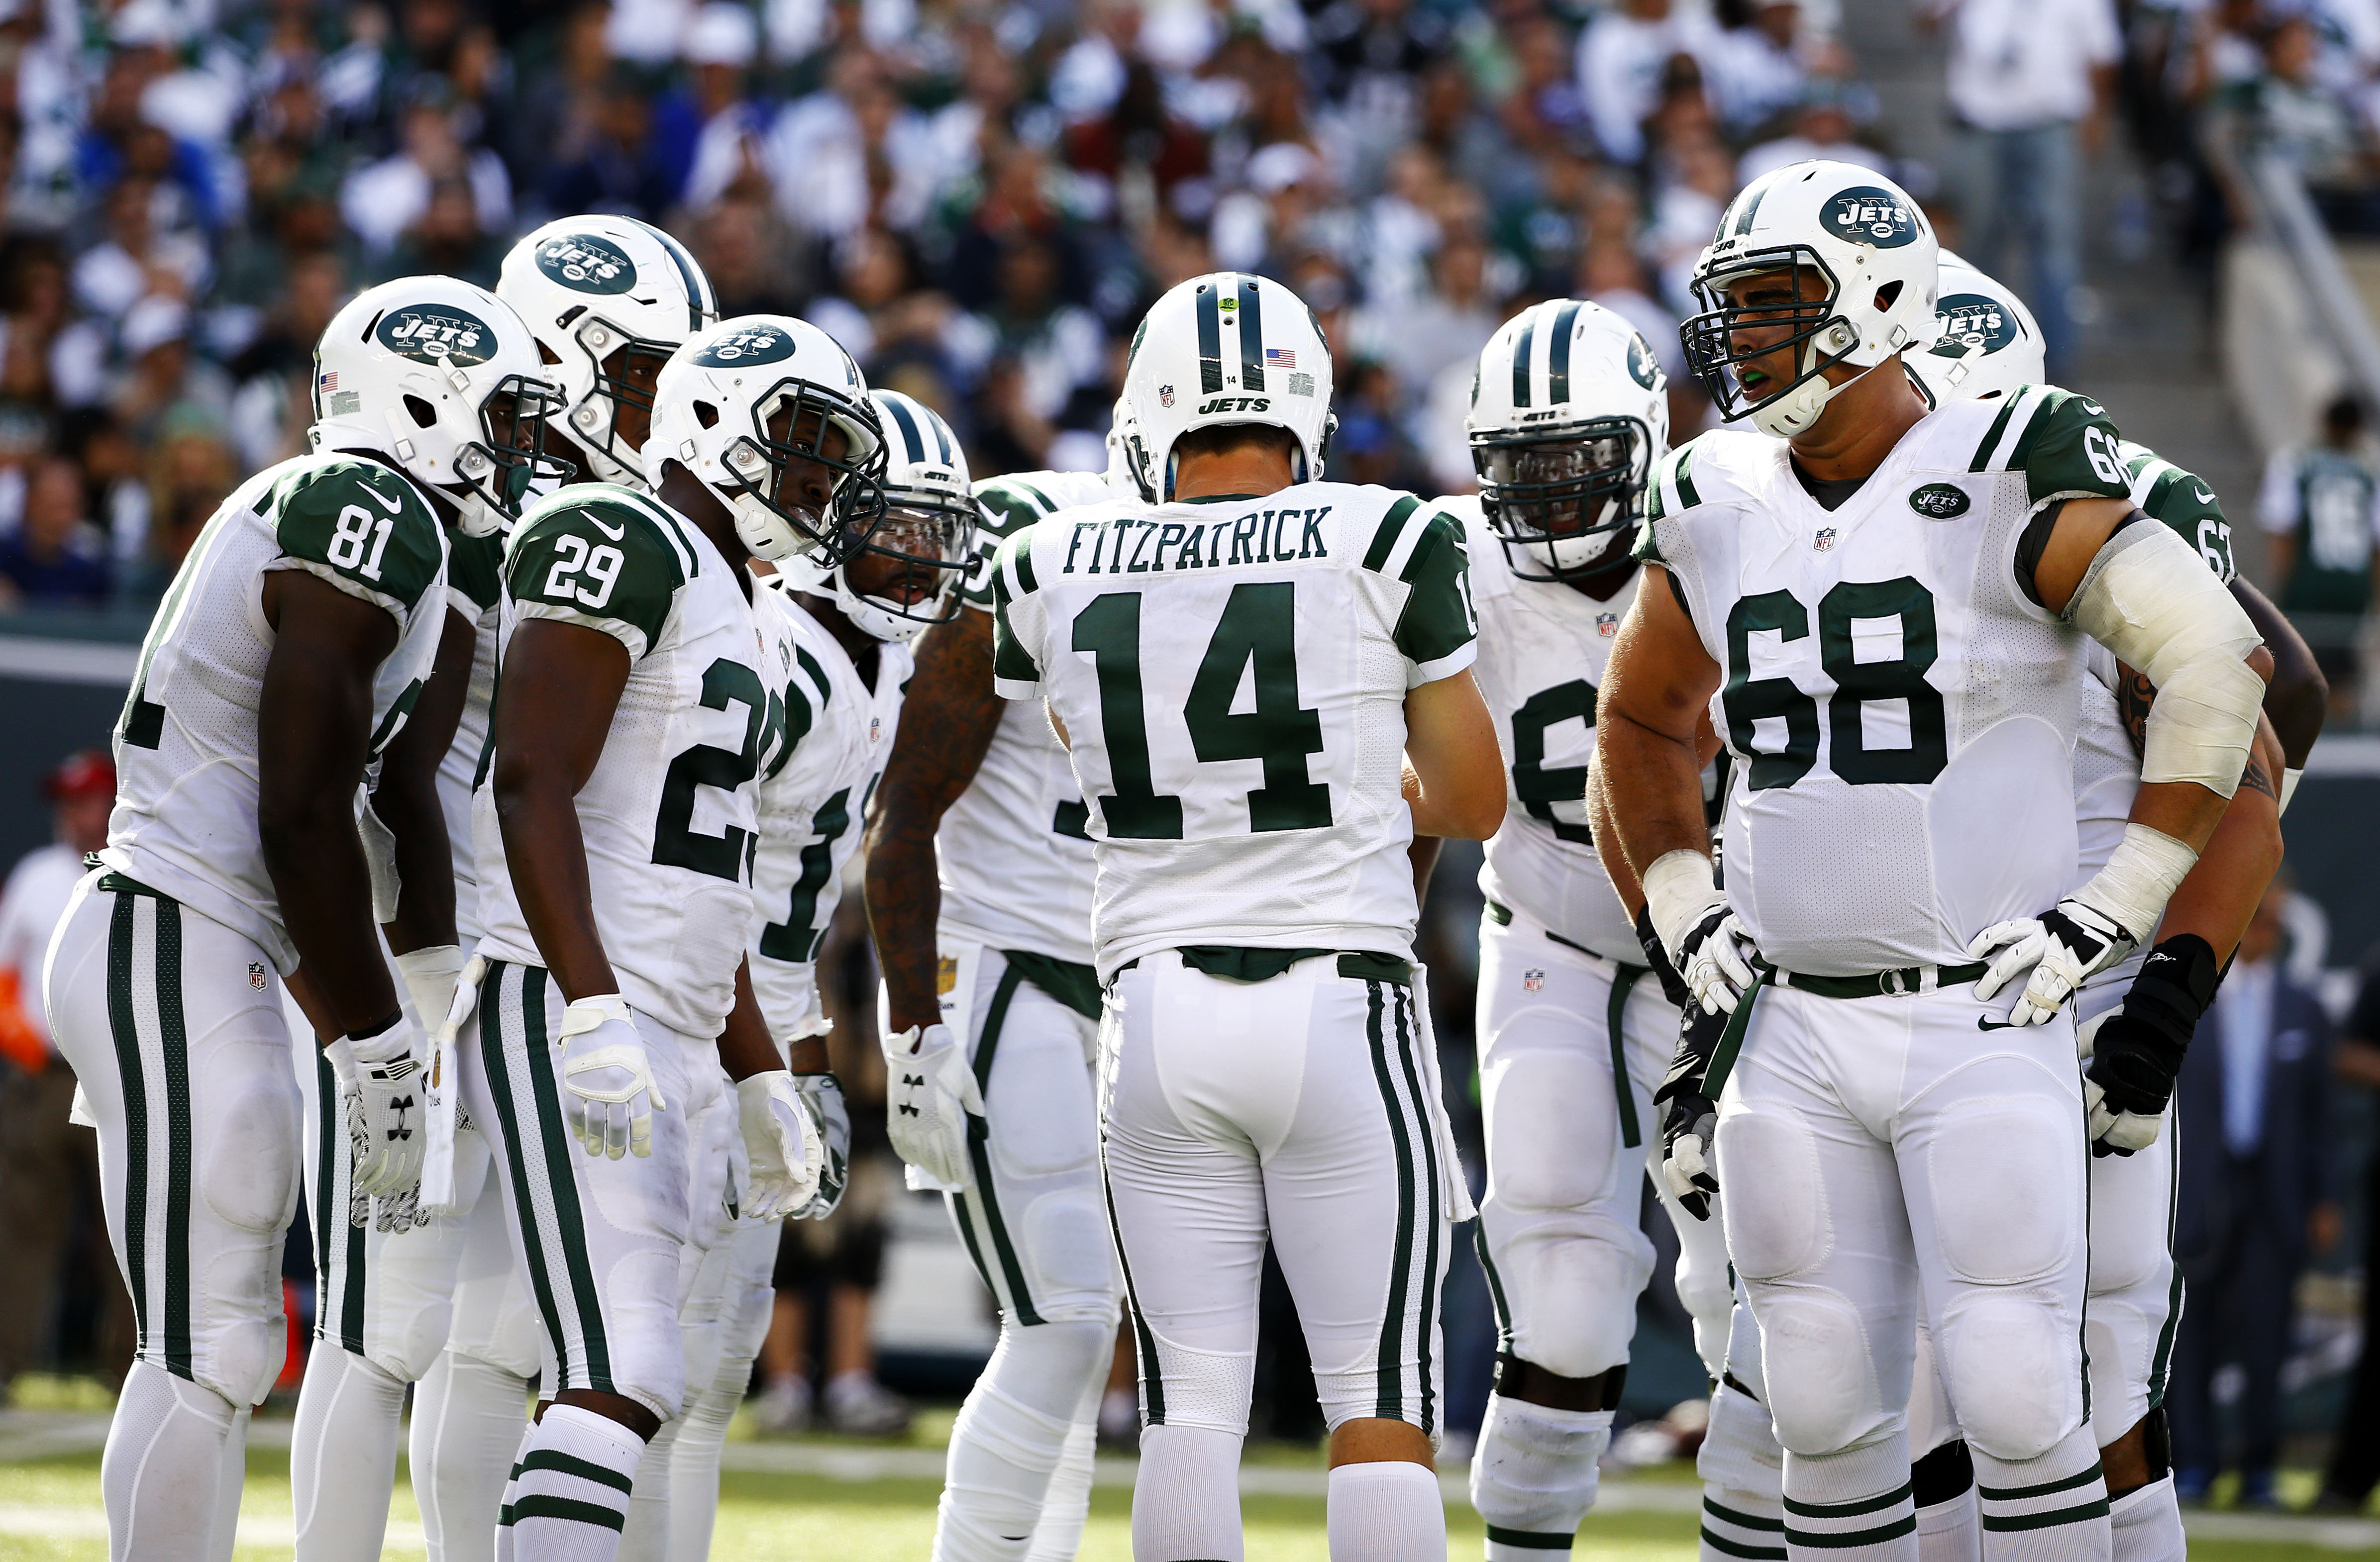 New York Jets are Bringing Toilet Paper to London